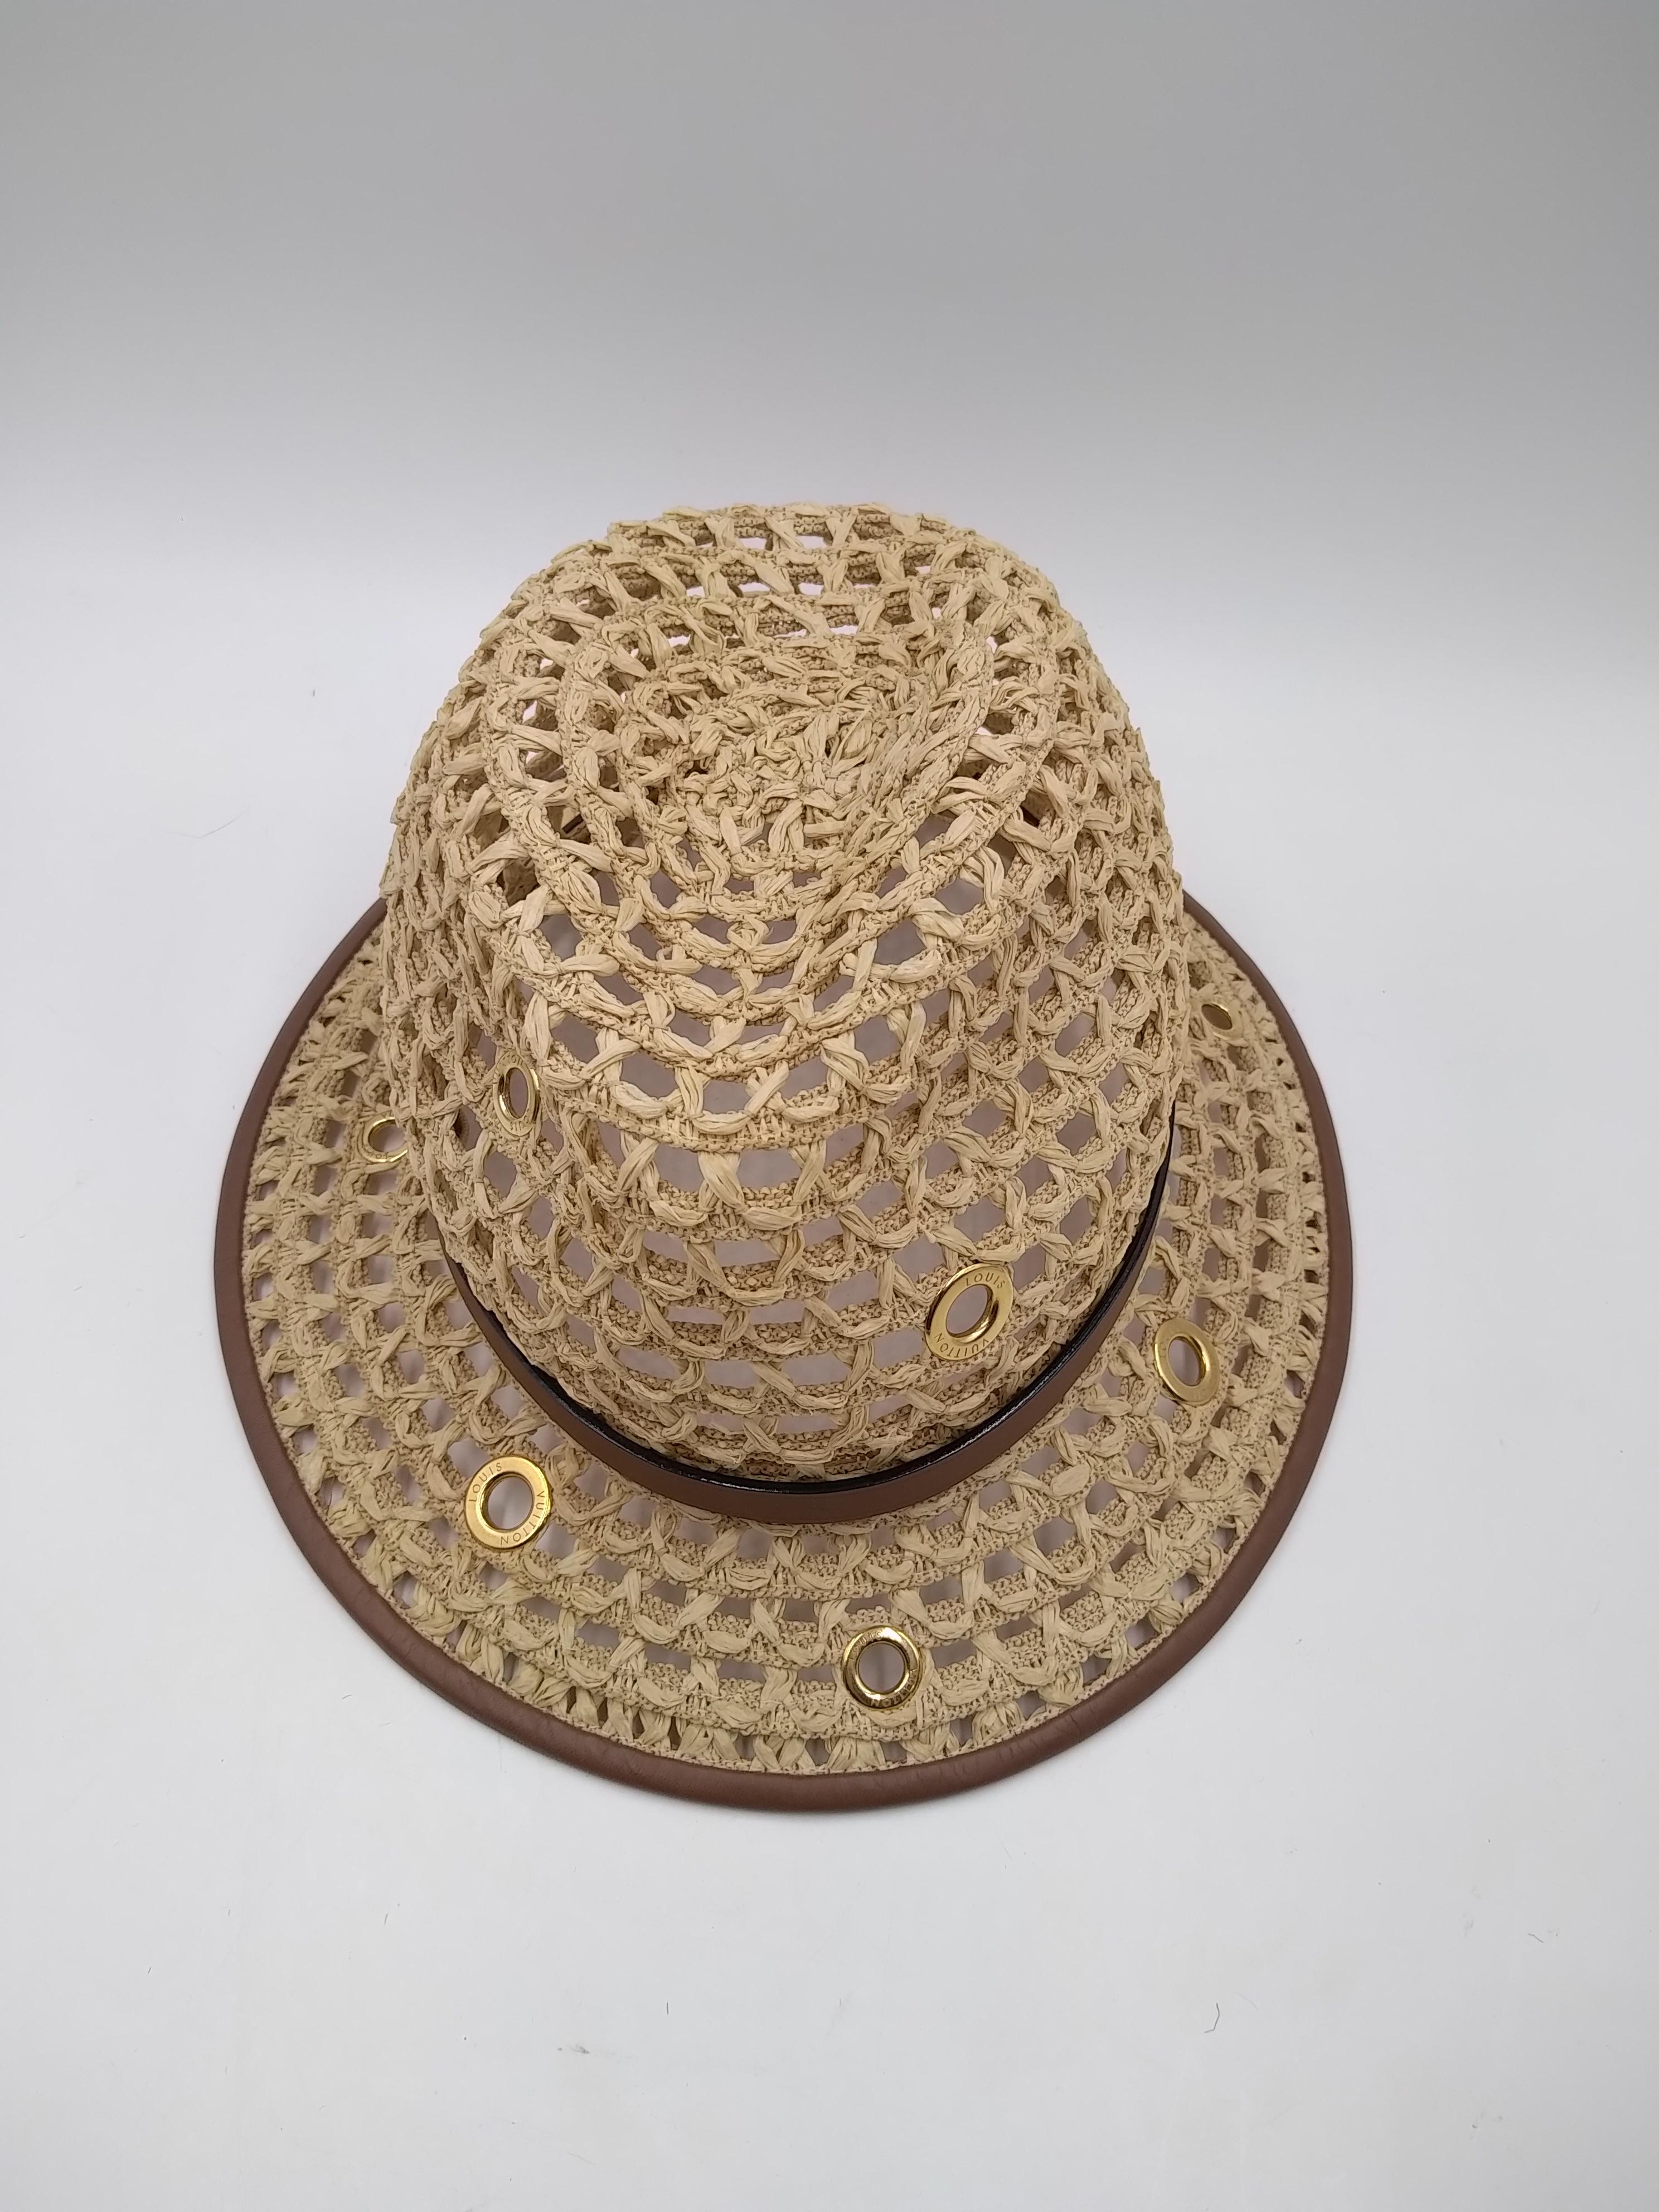 Louis Vuitton Straw Panama Cruise 2011 Summer Sun Hat
-100% authentic Louis Vuitton
- Viscose with leather trim and grommets to body and rim
- Circumference 56 cm